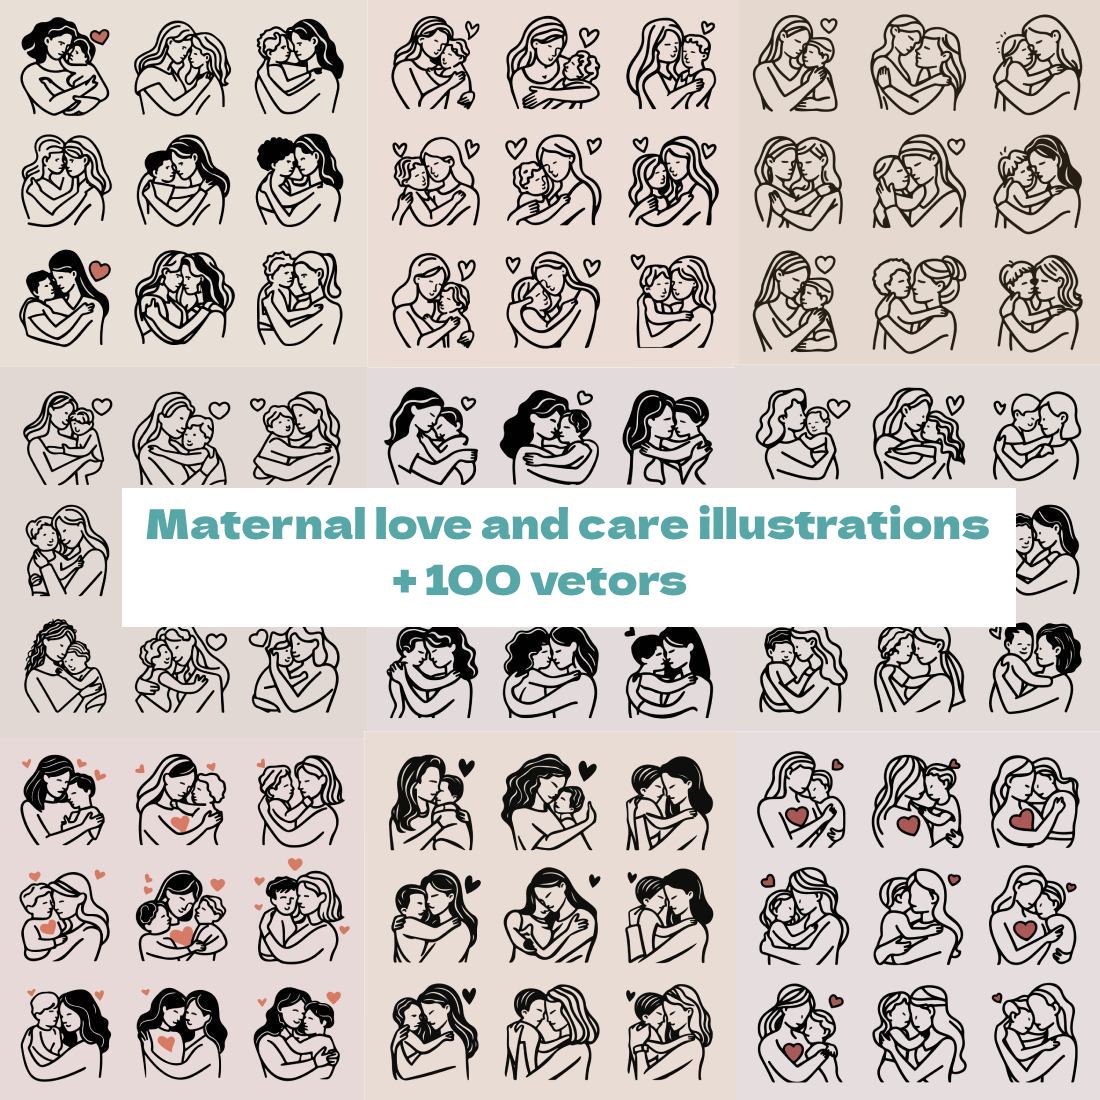 288 Maternal love and care illustrations cover image.